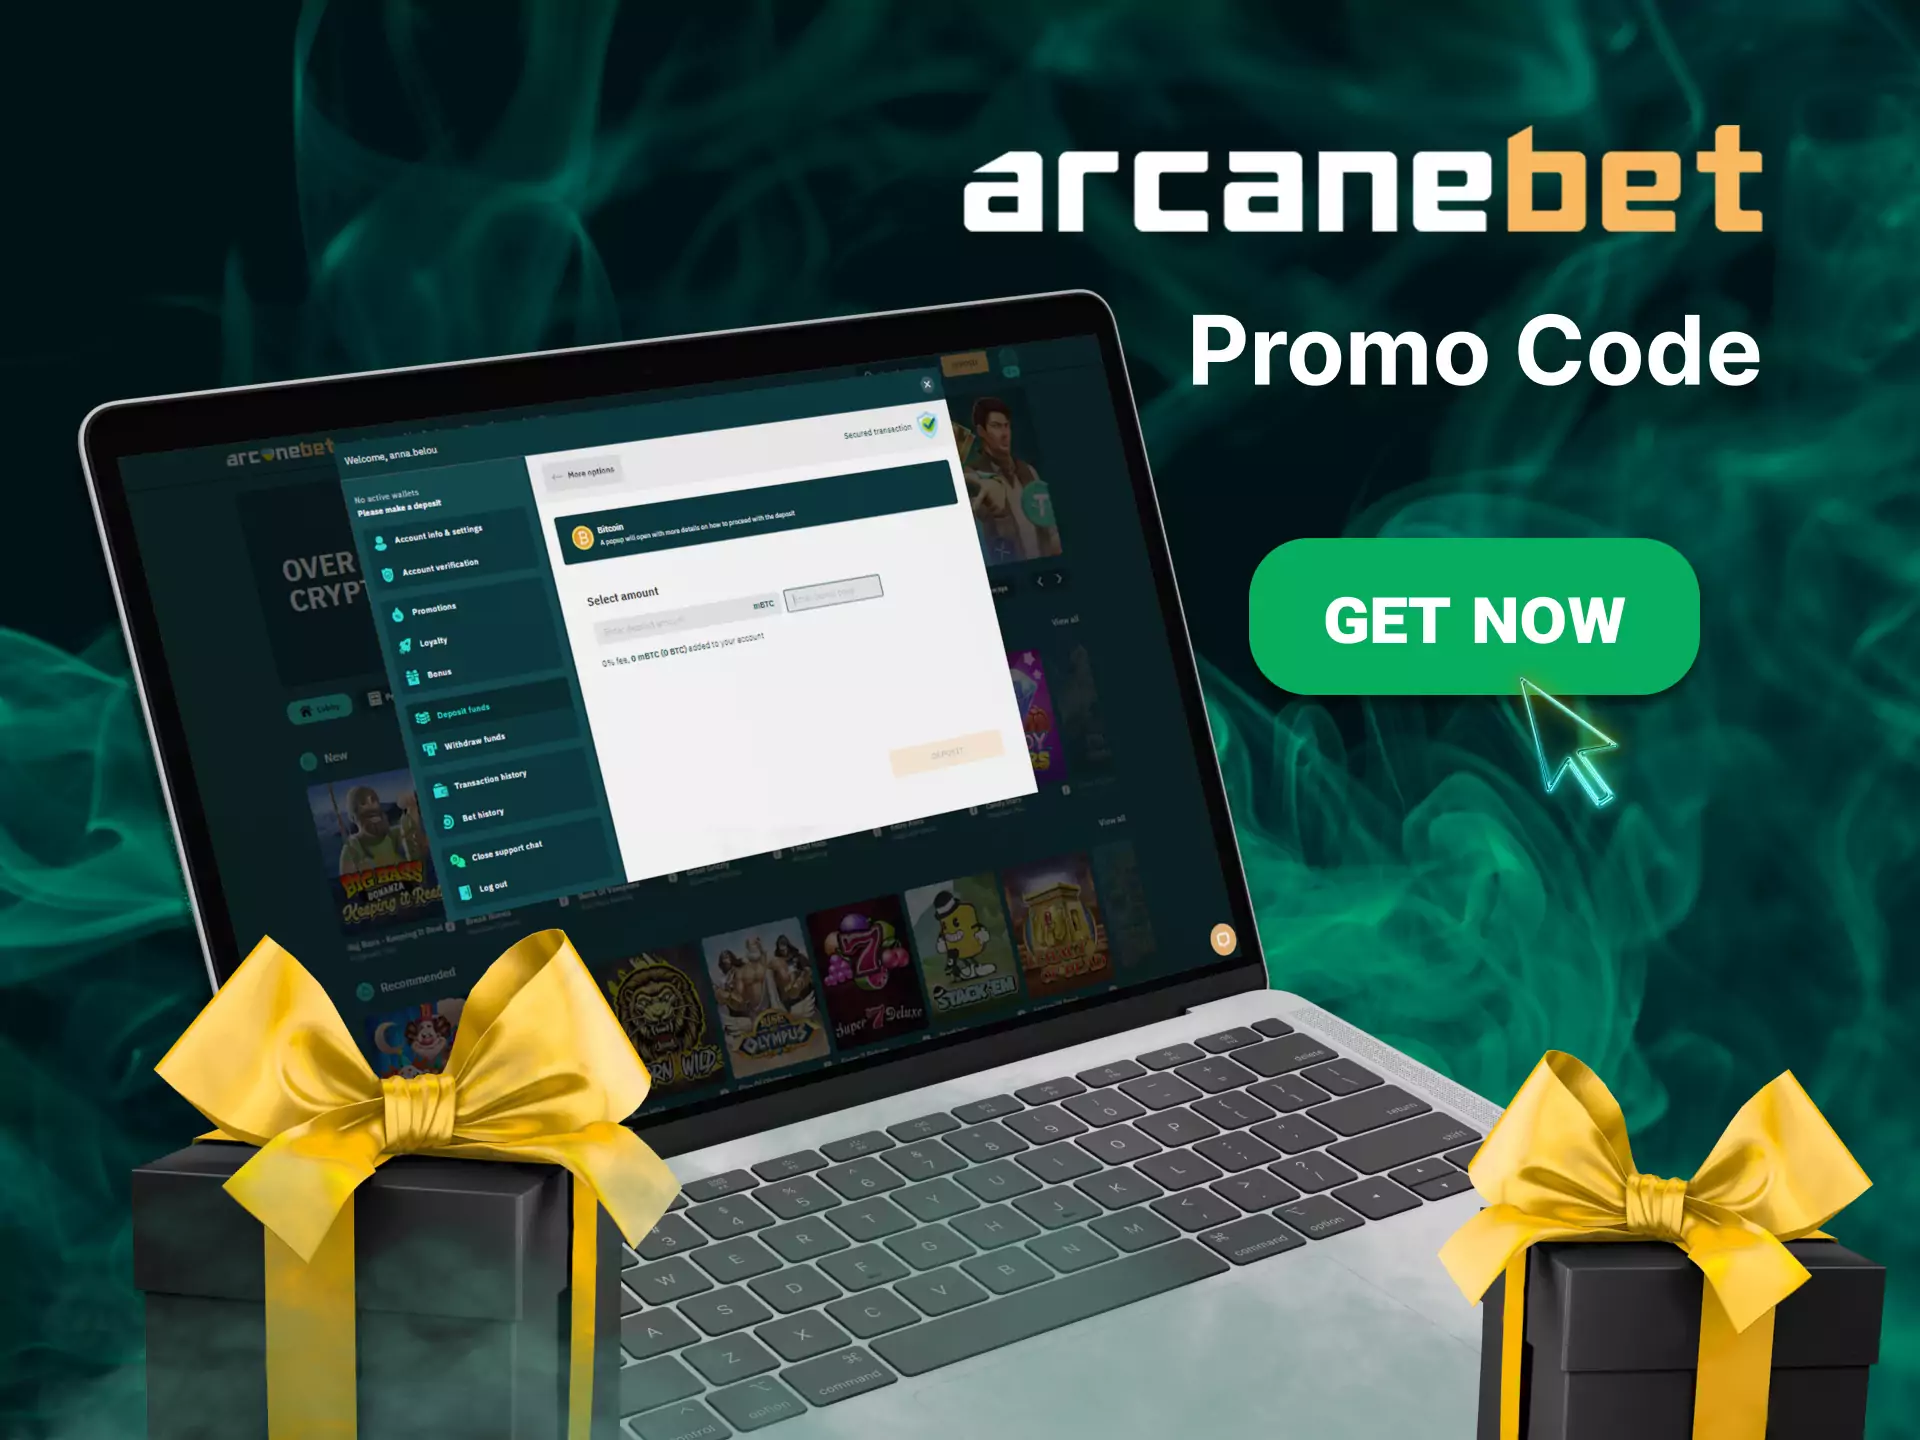 Use the special promo code Arcanebet, get the benefit.